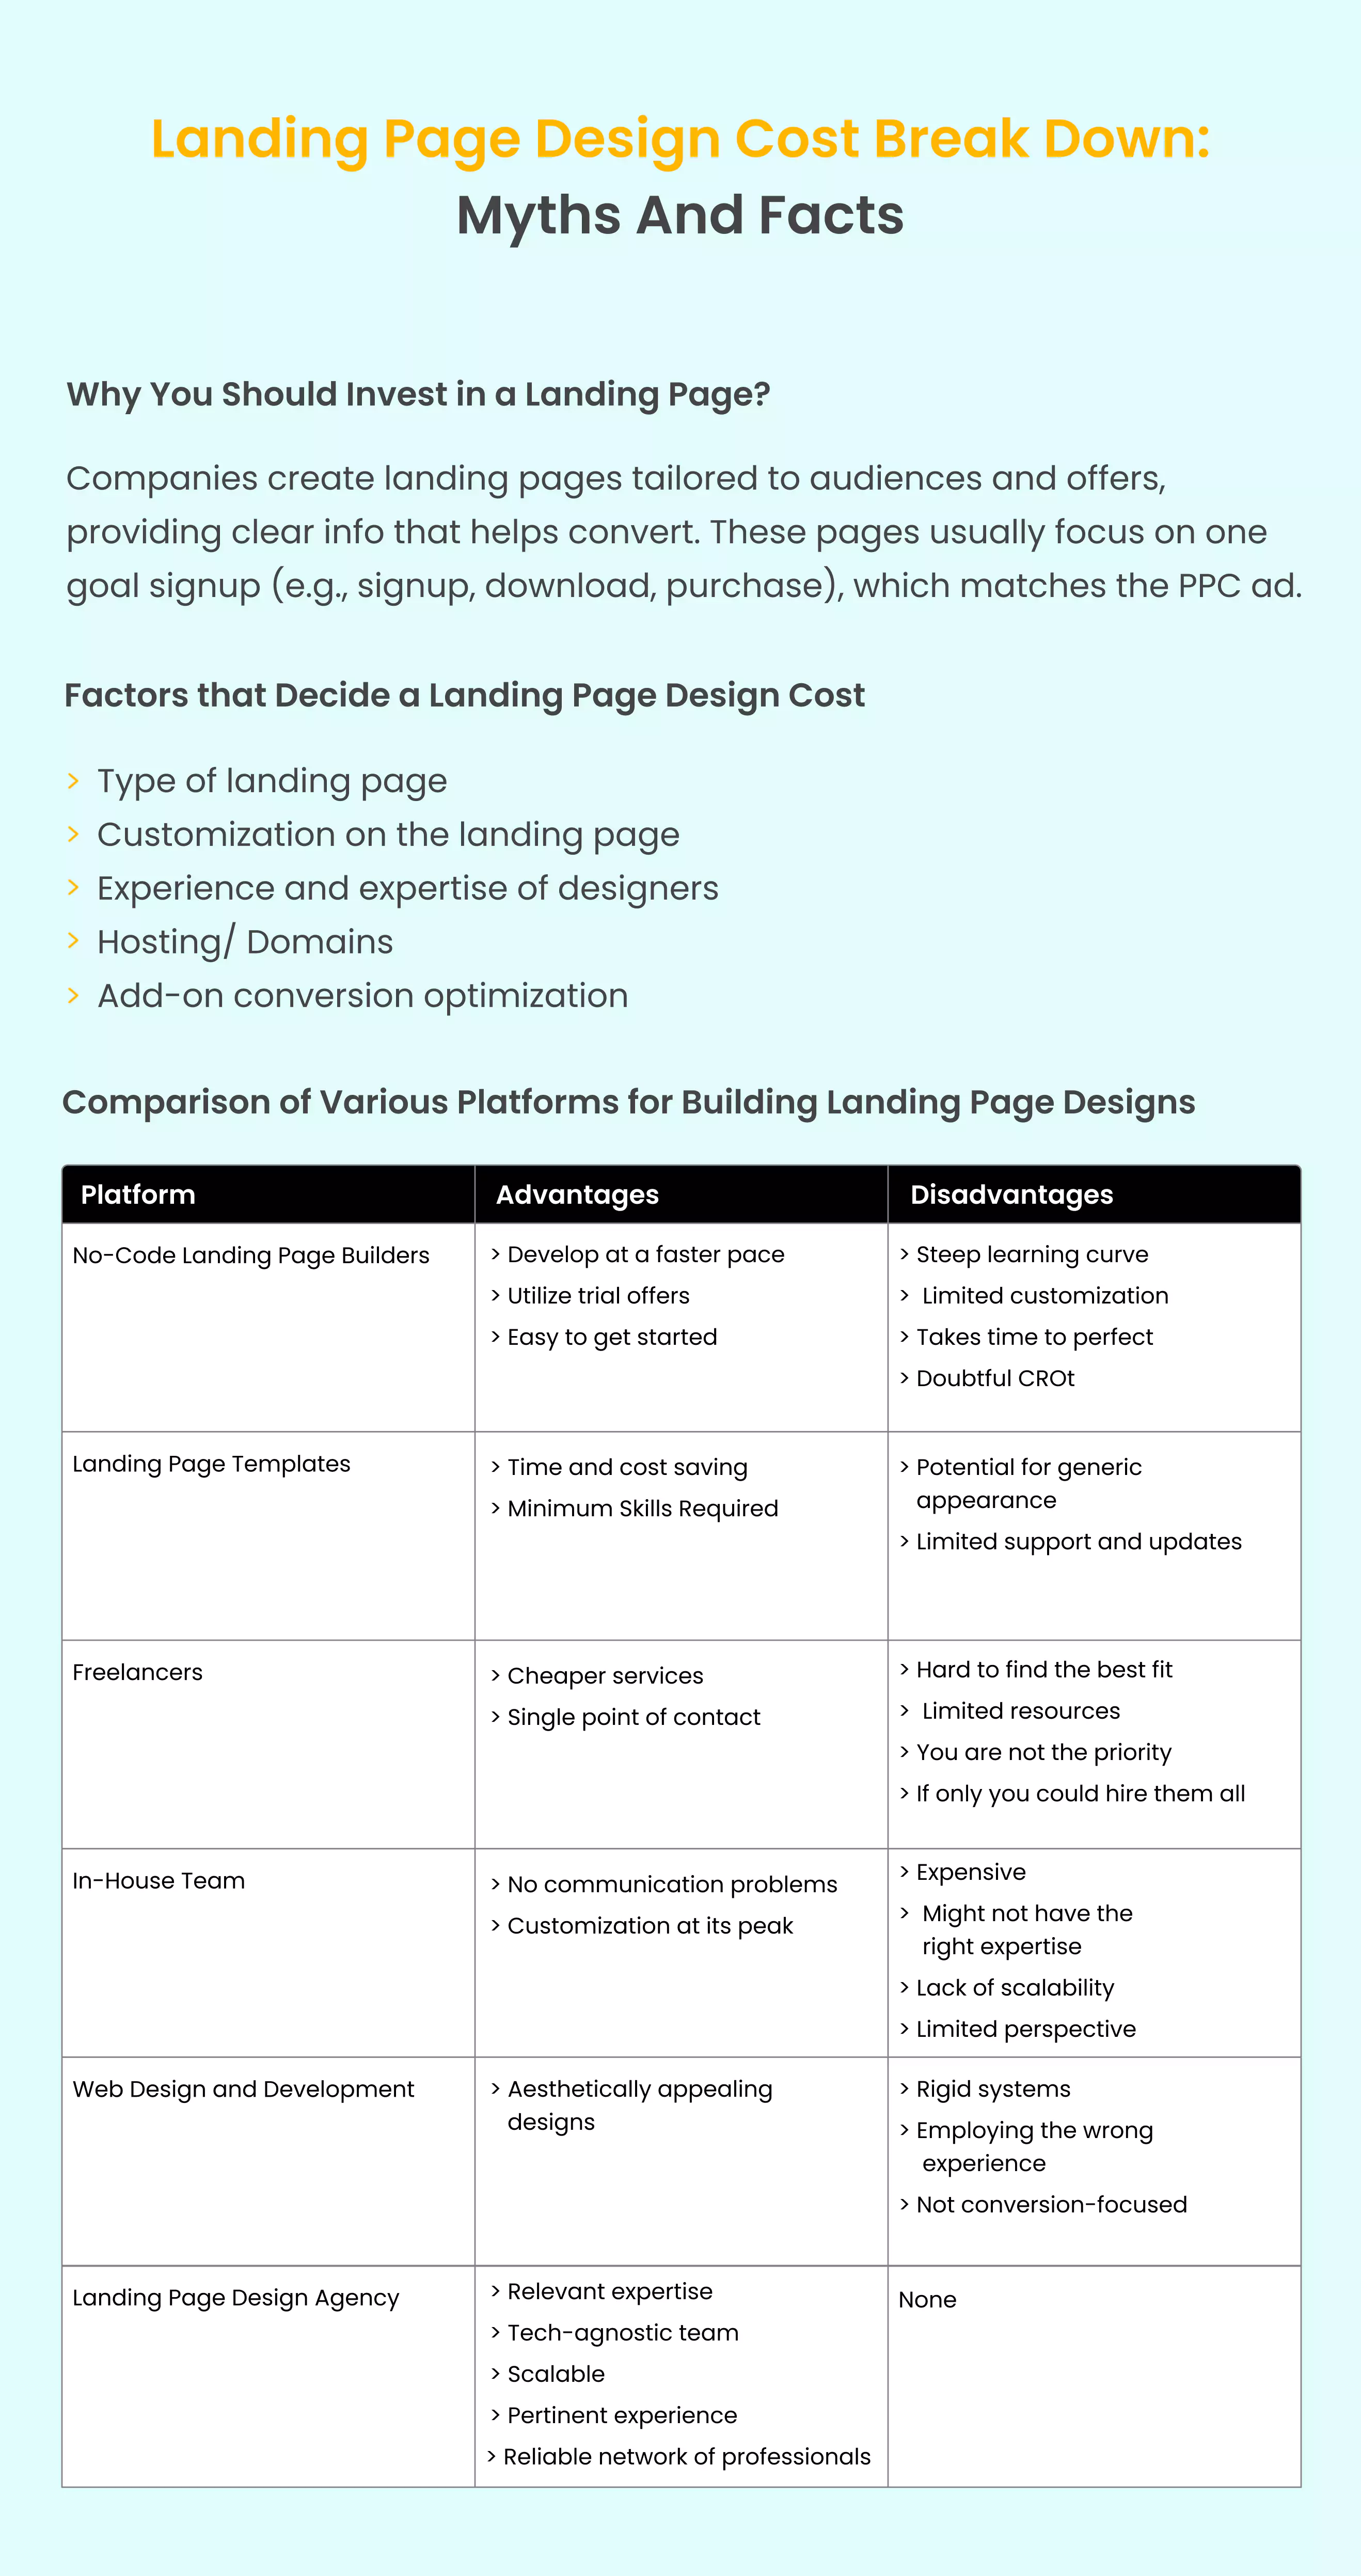 landing-page-design-cost-summary-dcacb1.webp